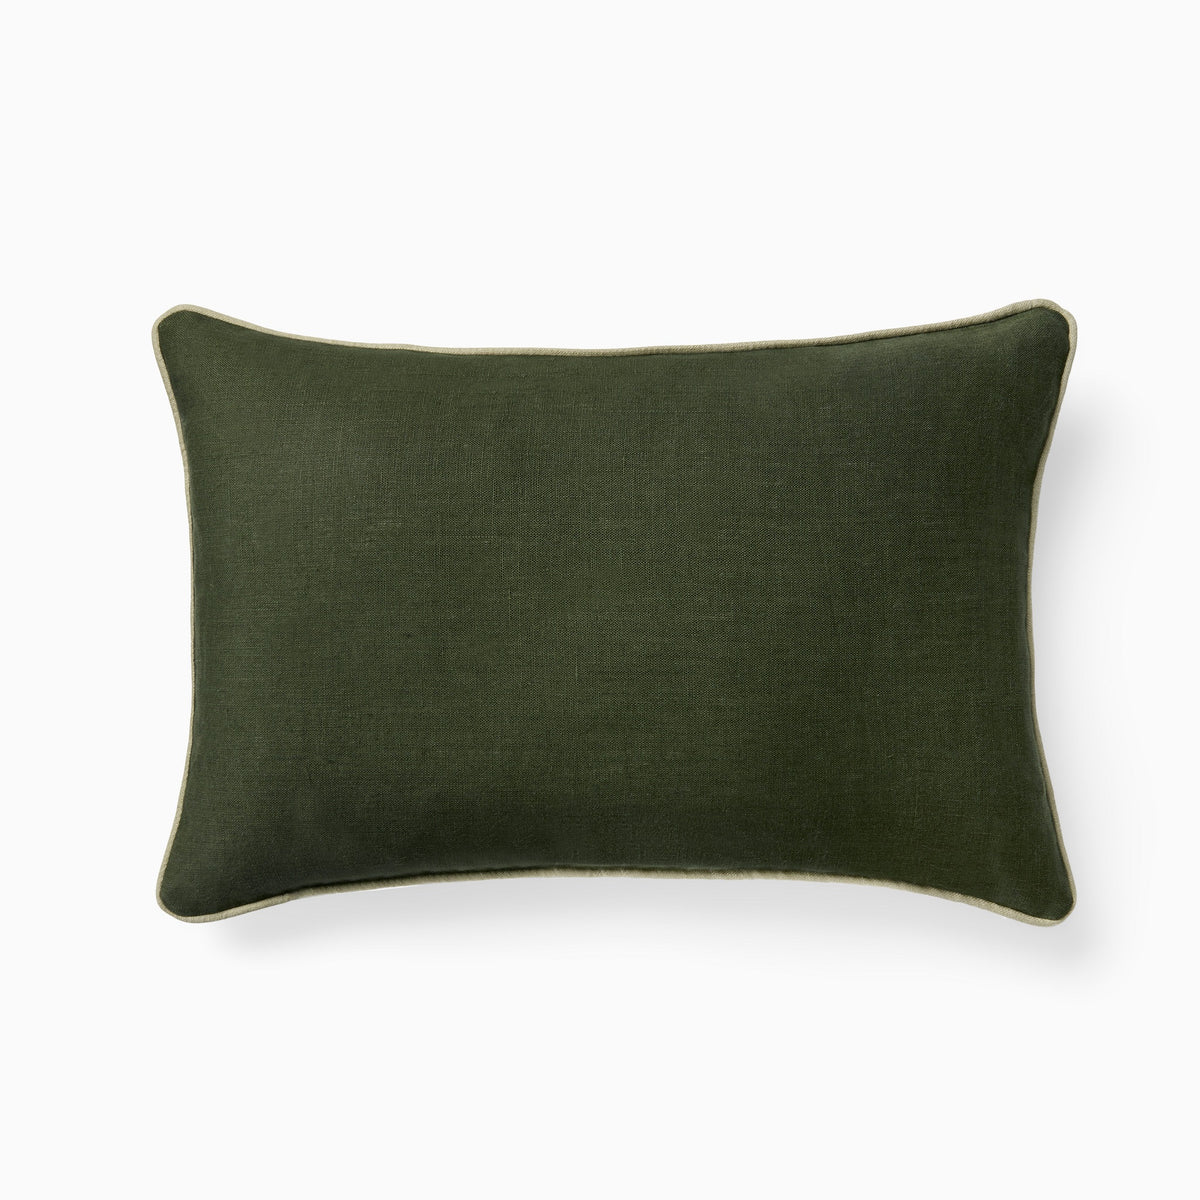 Clear Image of Sferra Manarola Decorative Pillow in Forest/Willow Back